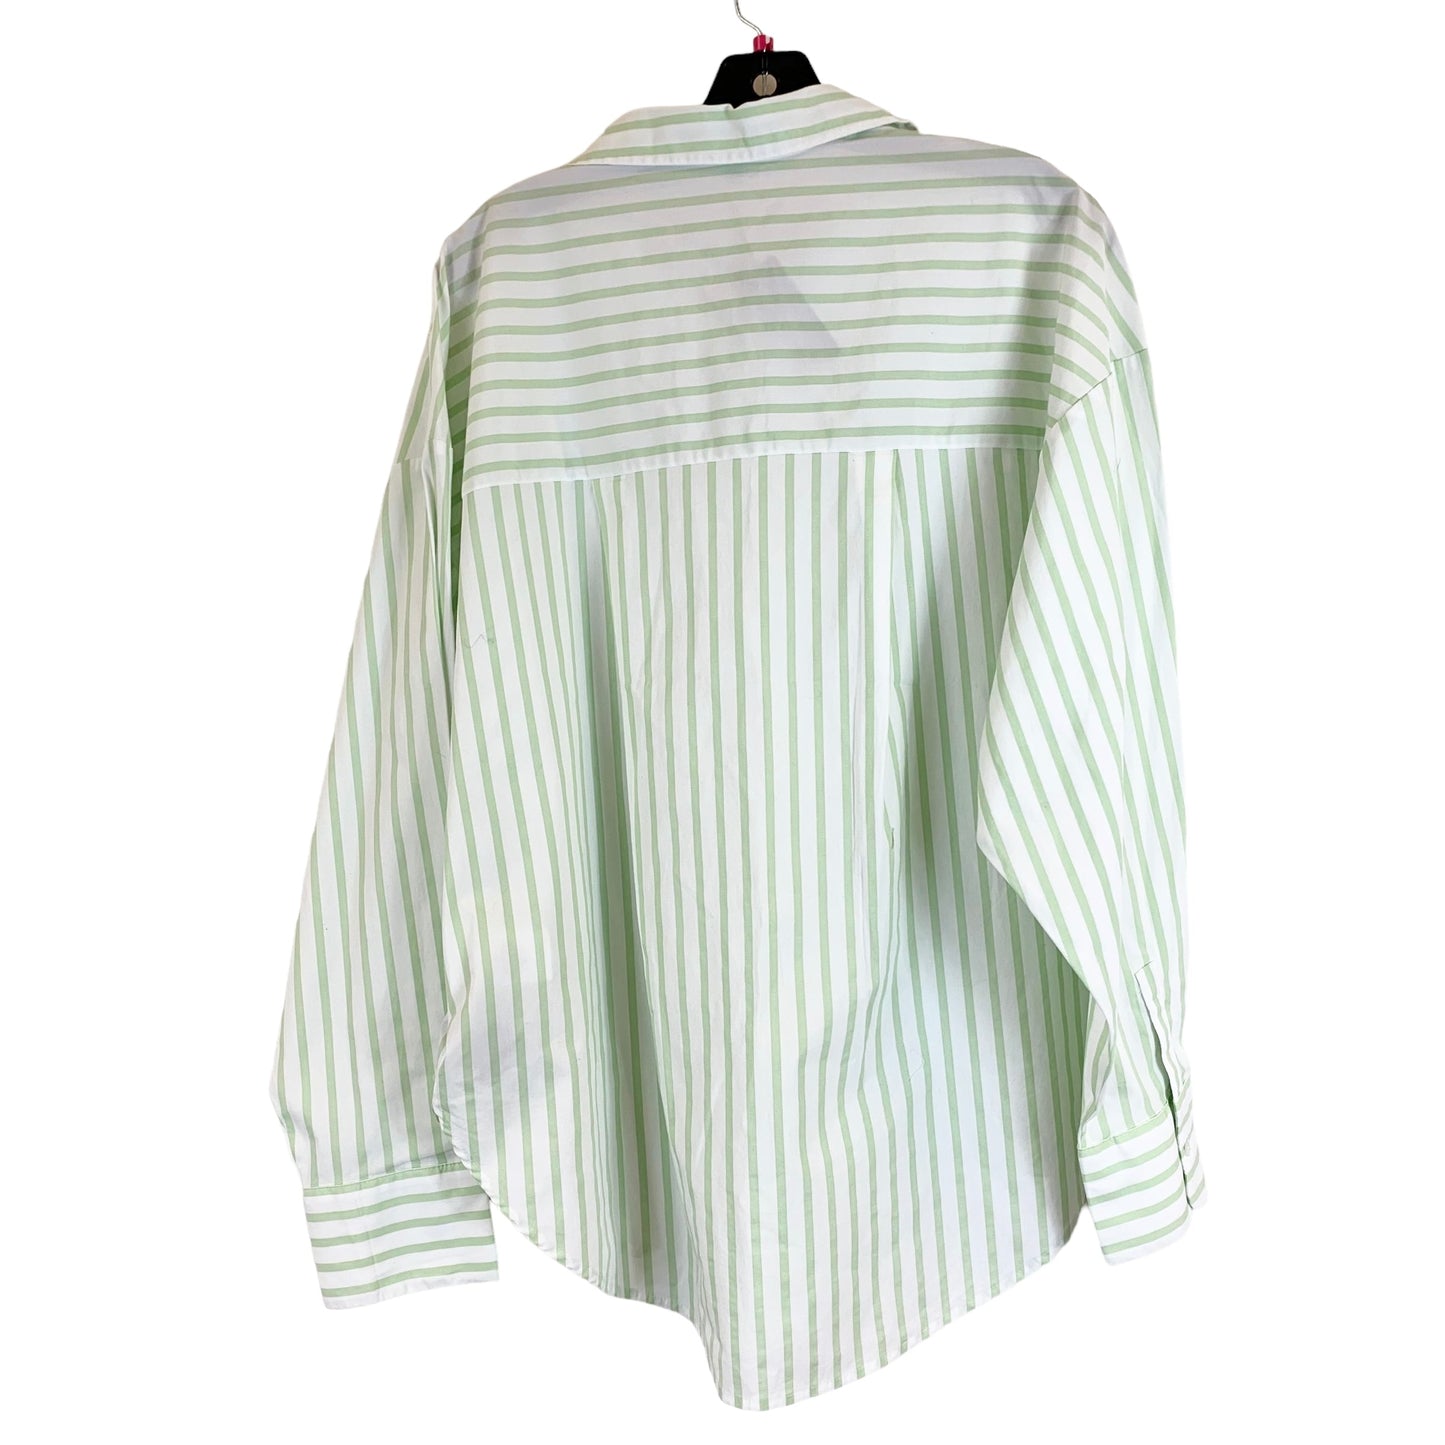 Green & White Top Long Sleeve Express, Size L